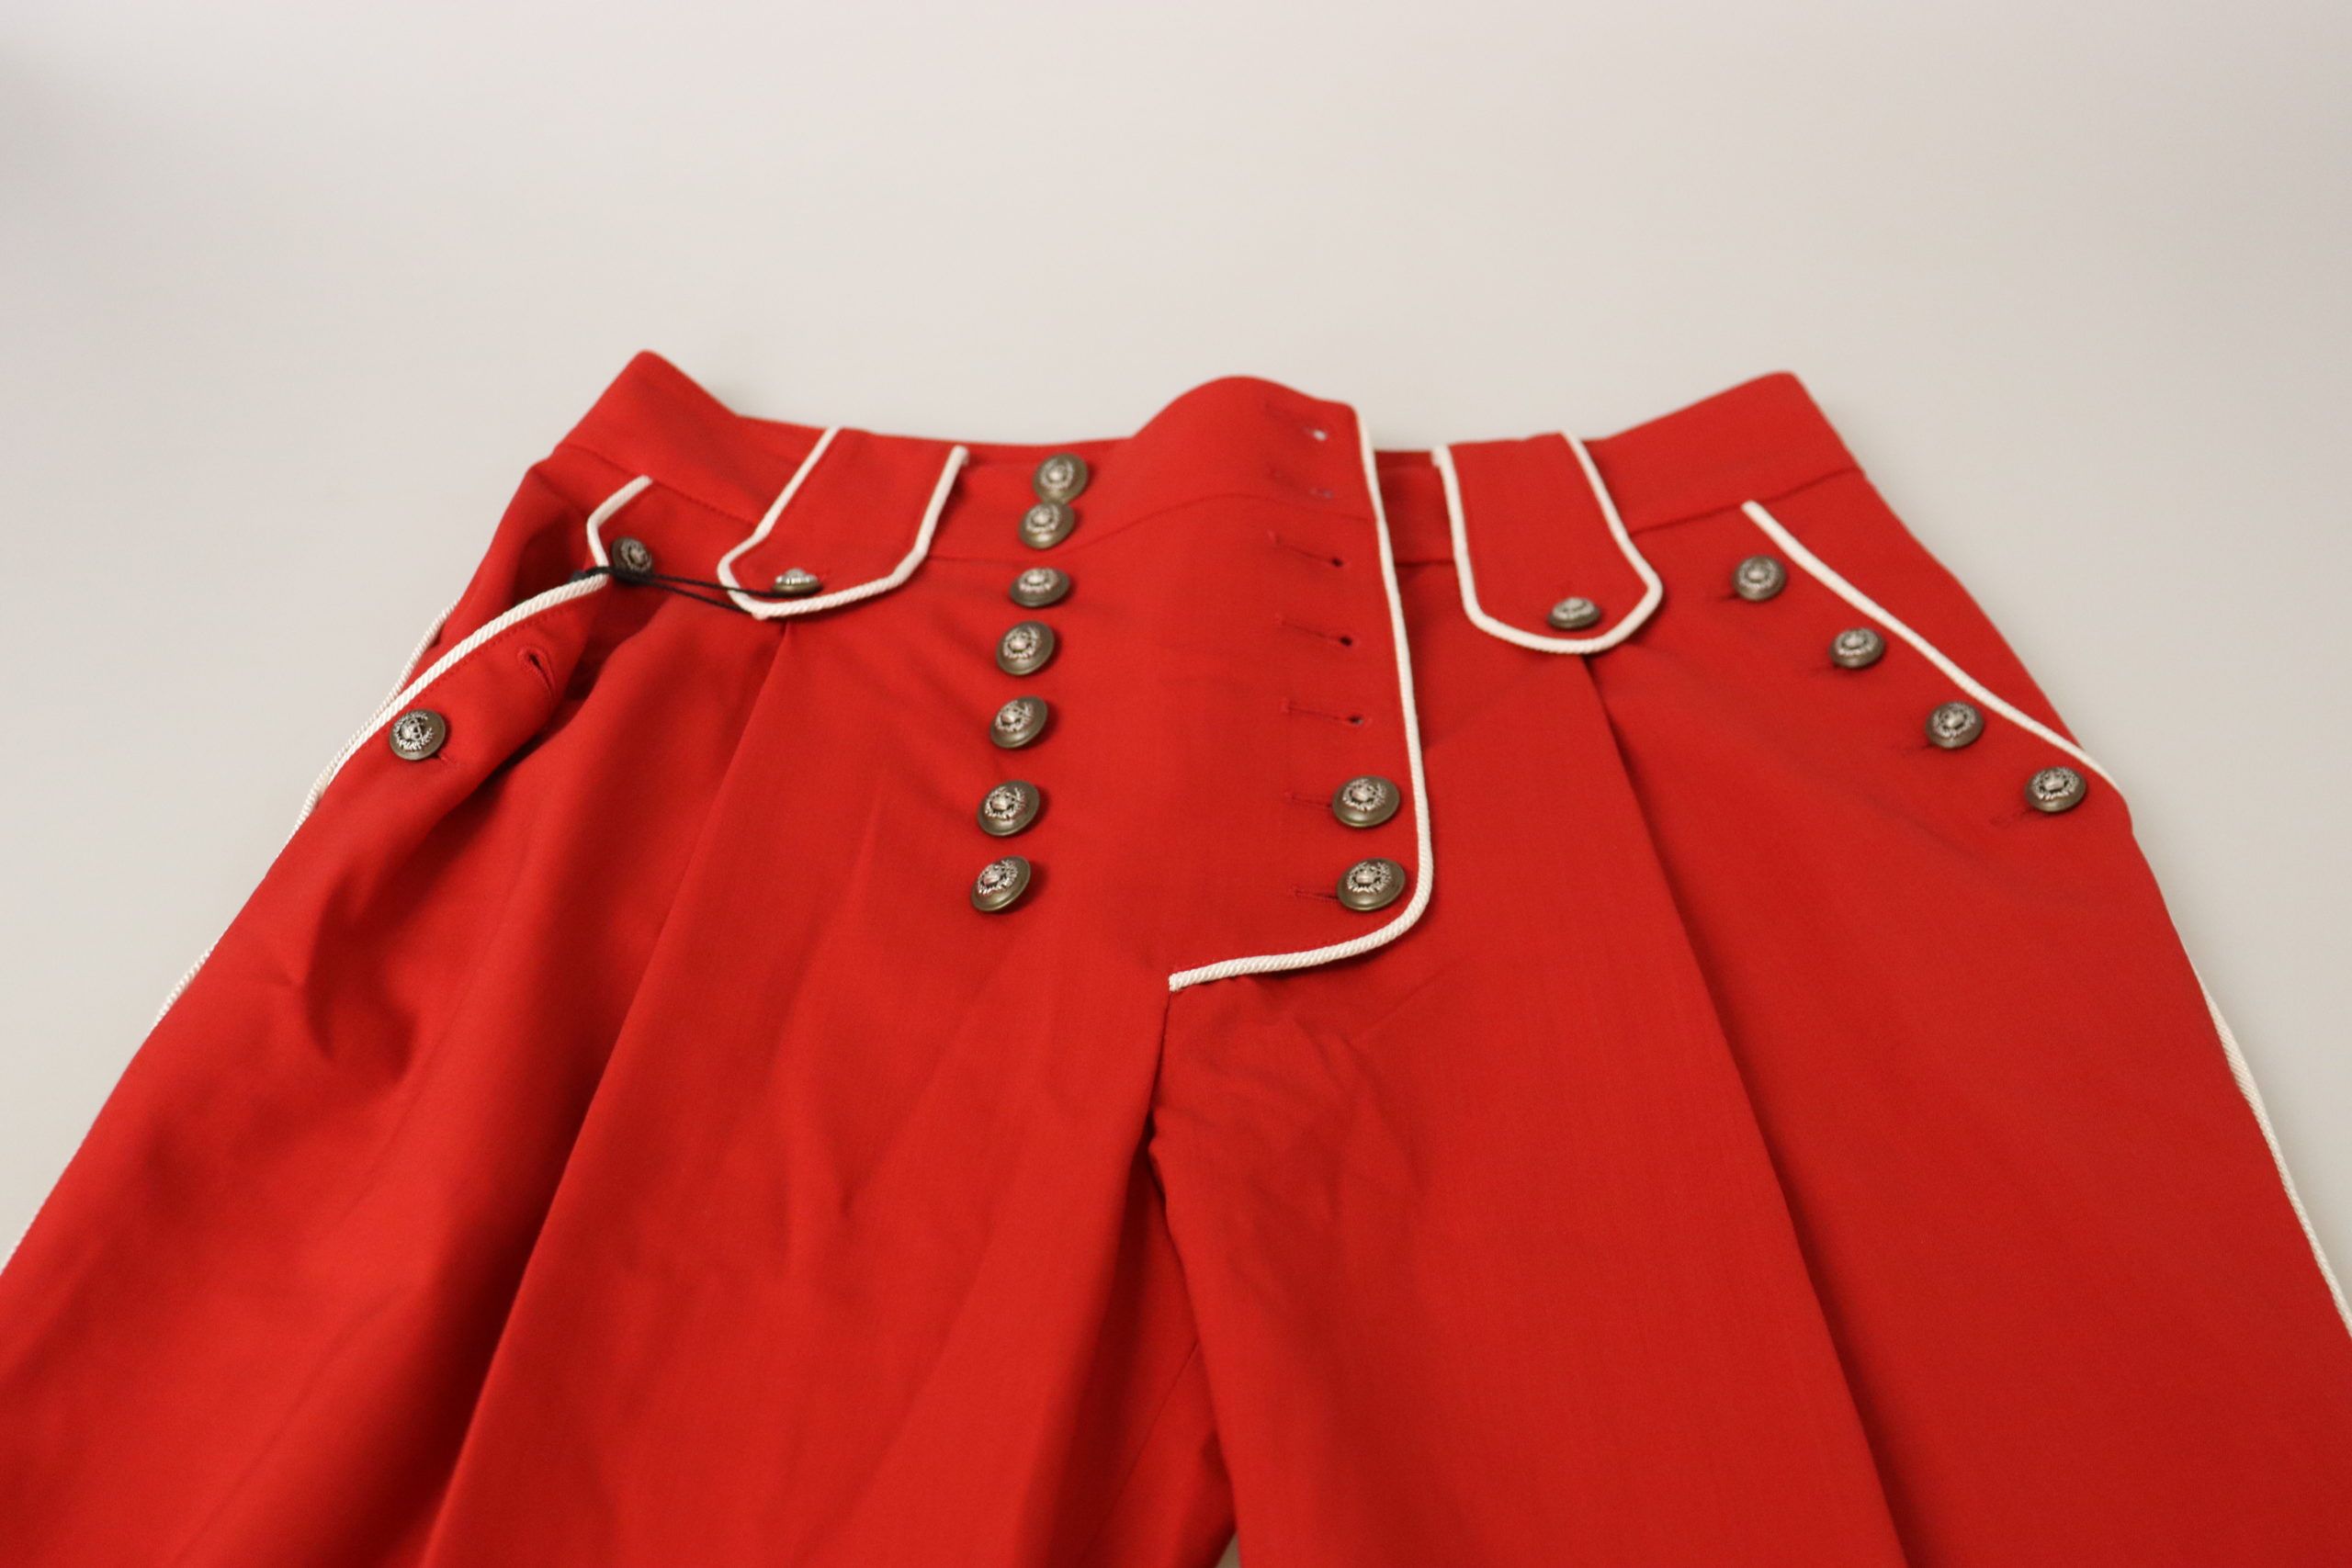 Red Button Embellished High Waist Pants